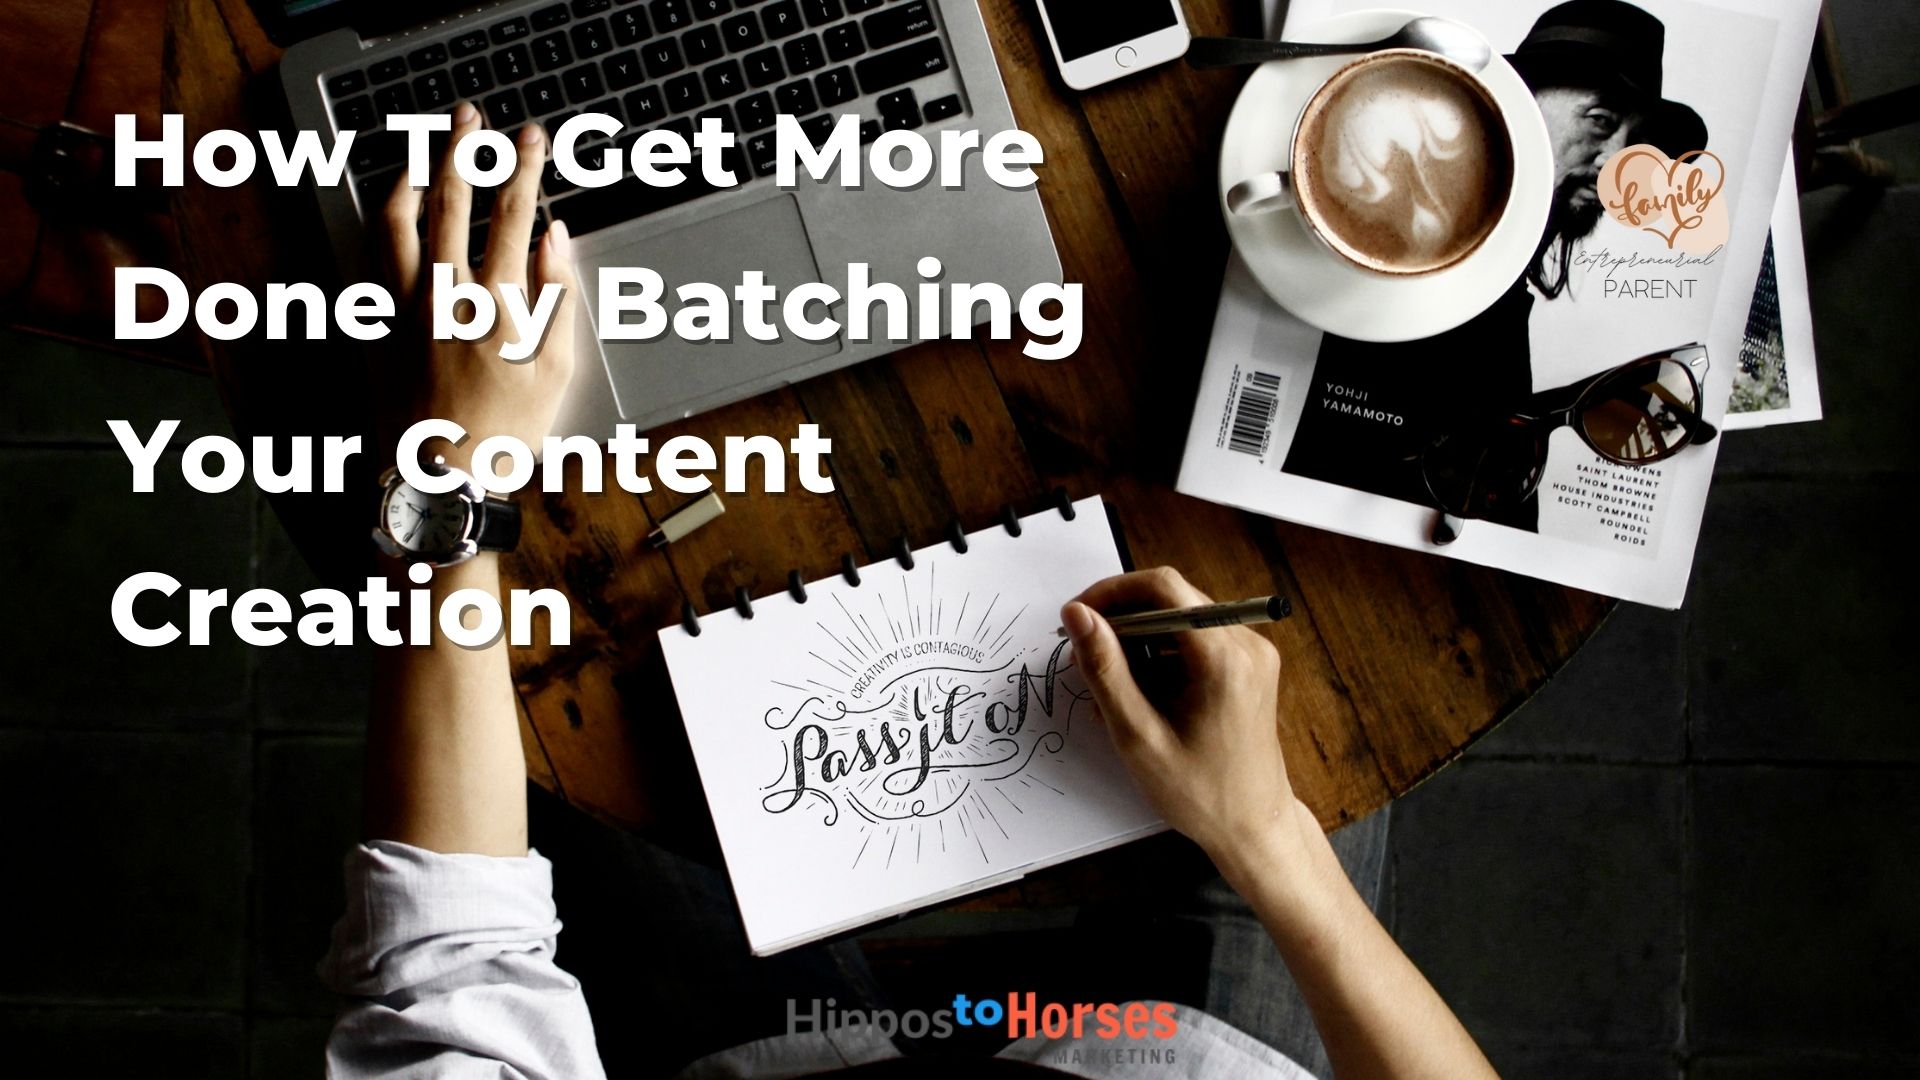 get more done by Batching content creation